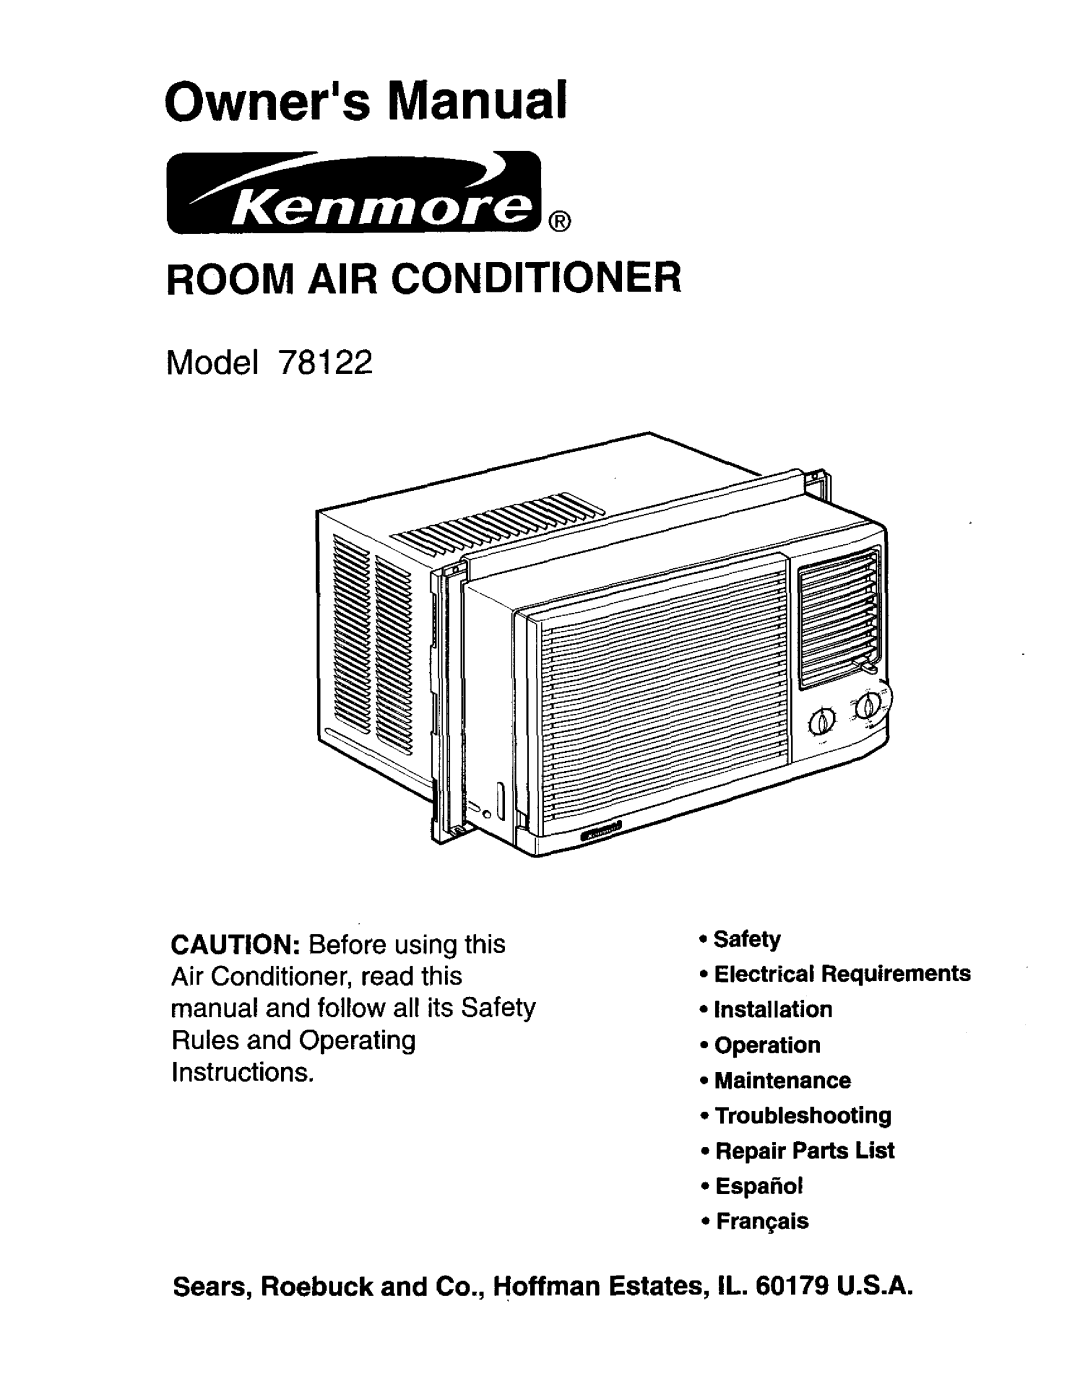 Kenmore 78122 owner manual Model, manual and follow all its Safety, Rules and Operating Instructions, Owners Manual 